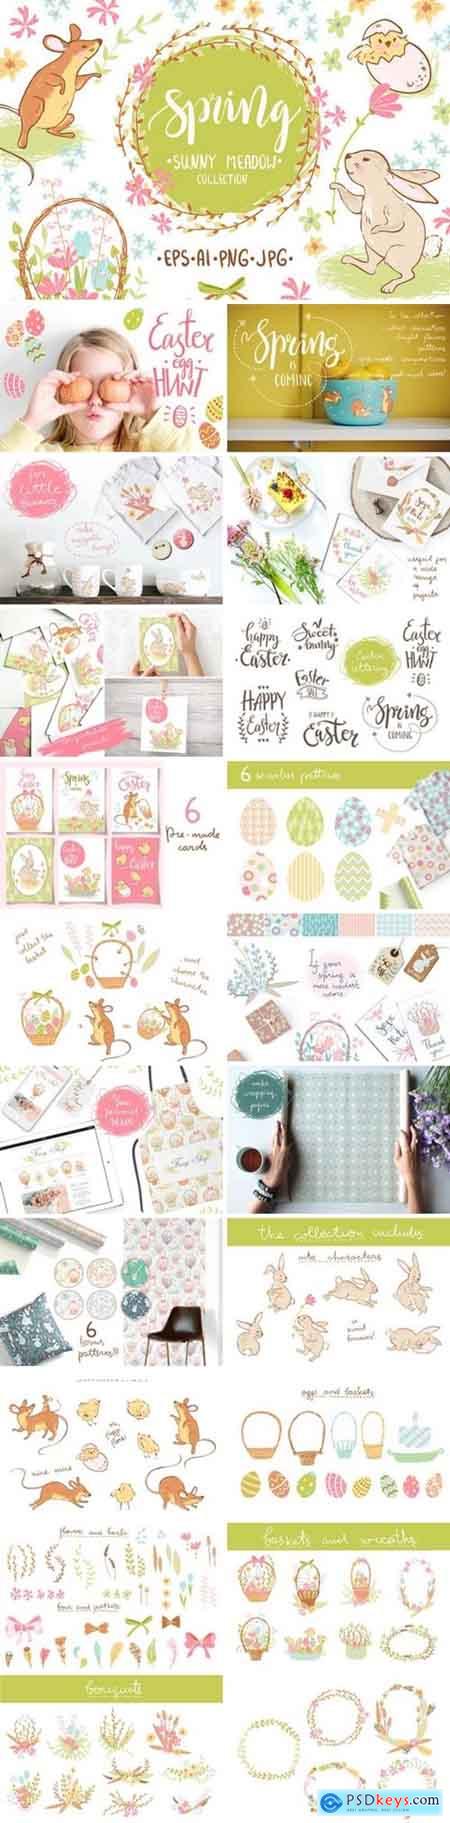 Spring meadow graphic set 2331542